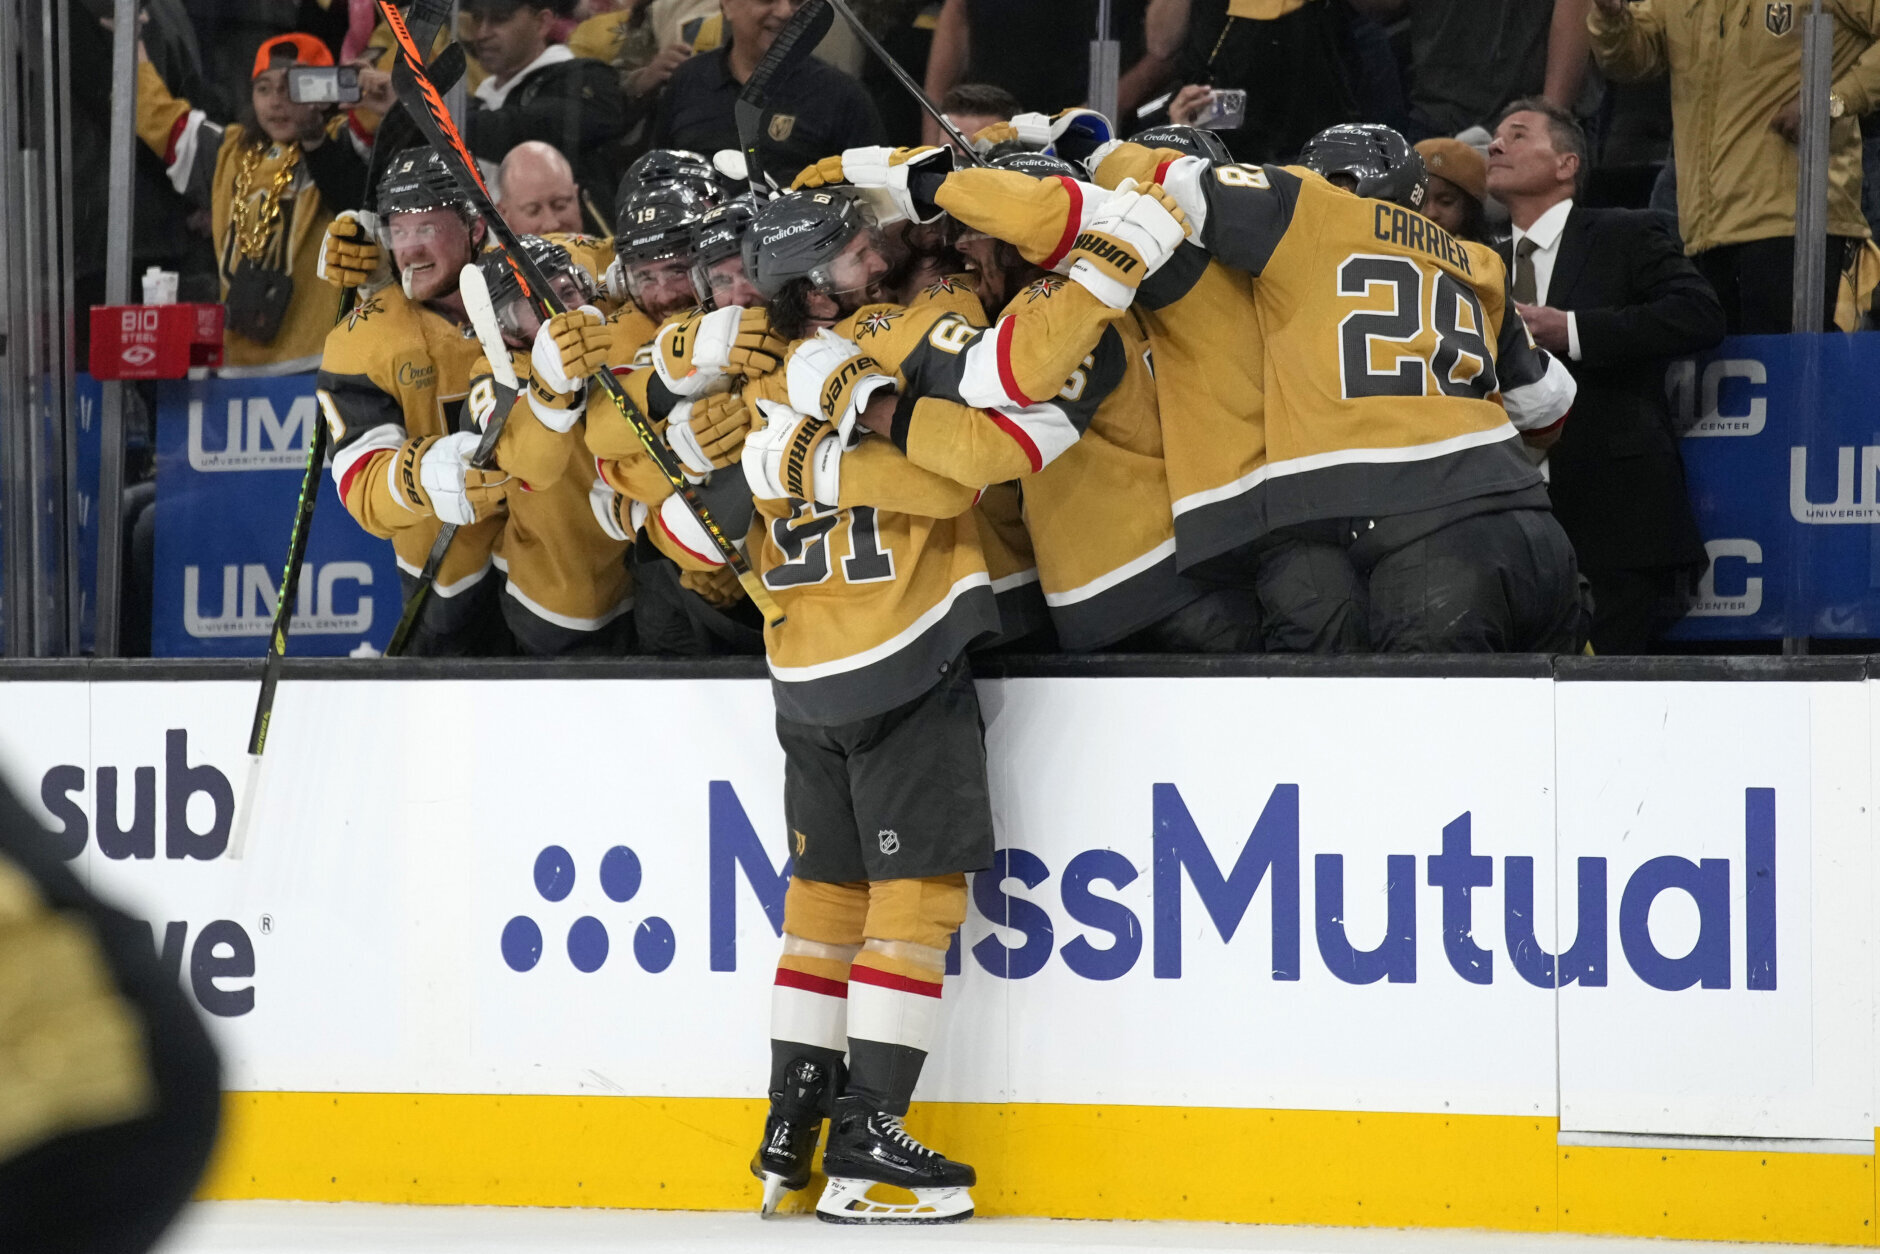 Las Vegas Golden Knights are making Stanley Cup history in their